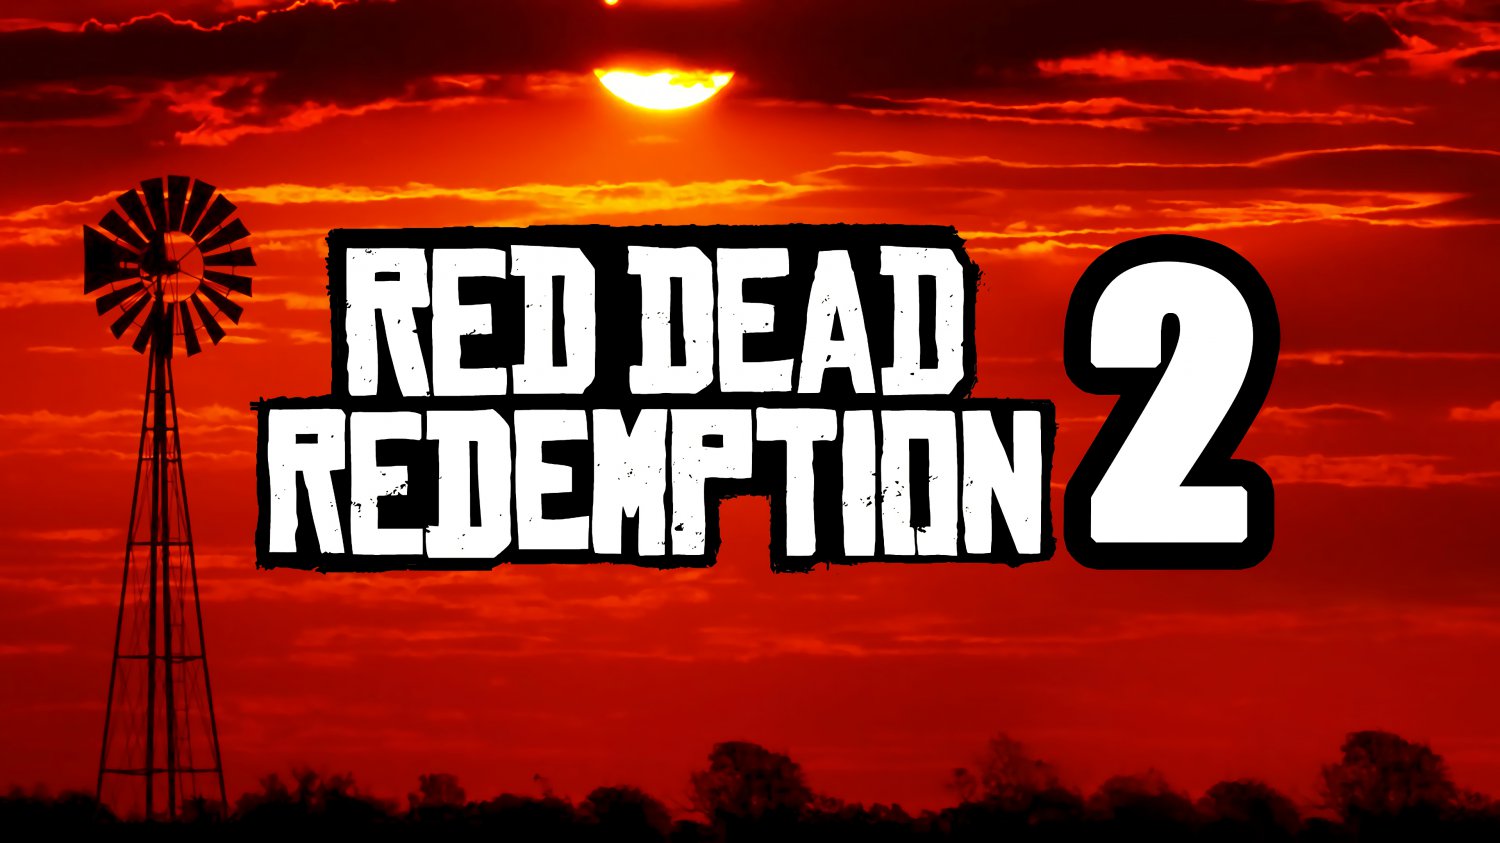 Red Dead Redemption 2 Game 18"x28" (45cm/70cm) Poster